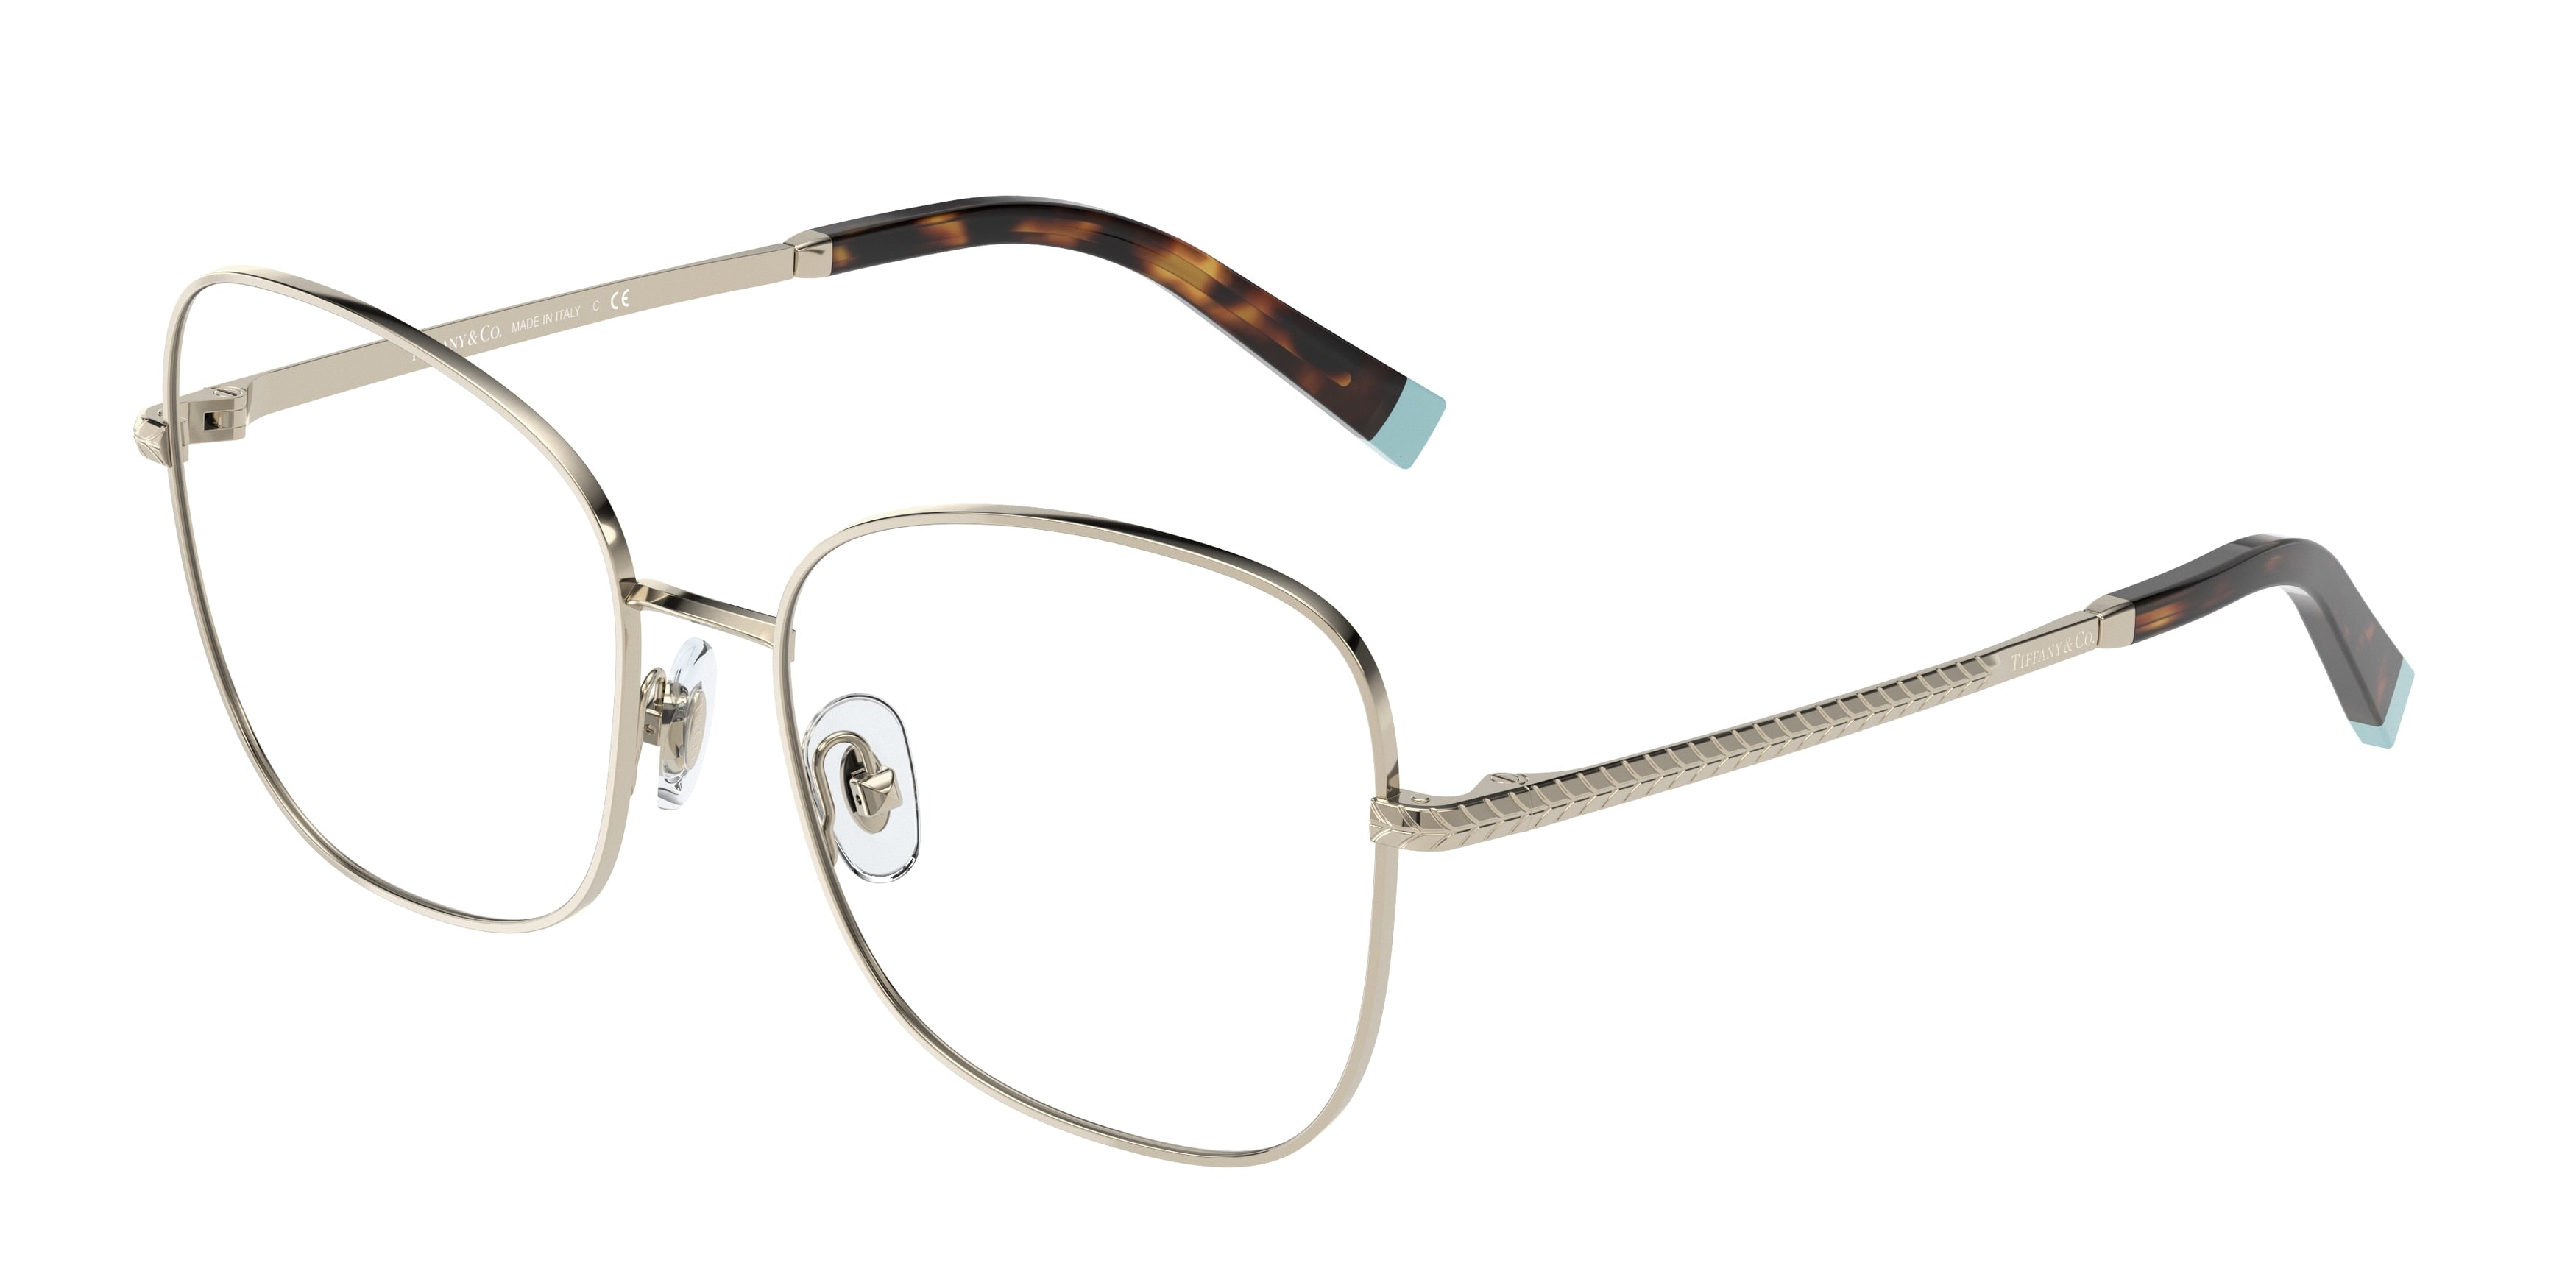 Tiffany TF1146 Square Eyeglasses  6021-Pale Gold 54-140-16 - Color Map Gold